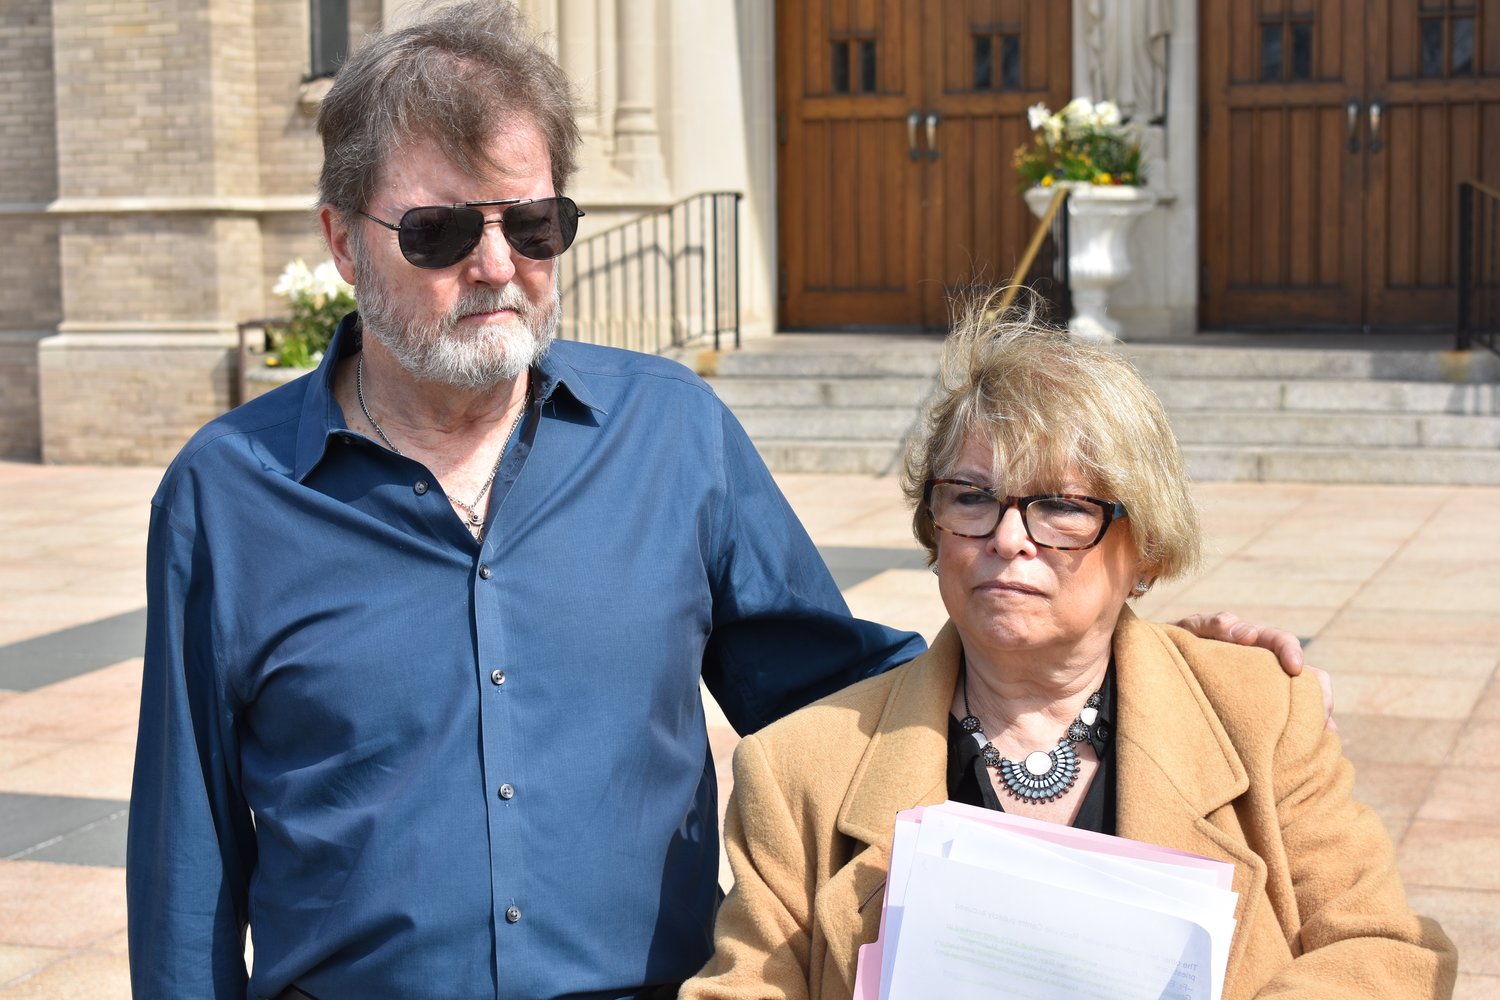 Brian Toale and Janet Klinger, who both said they were sexually abused when they were children, stood outside St. Agnes Cathedral on May 2, calling on the Diocese of Rockville Centre to release the names of accused priests.